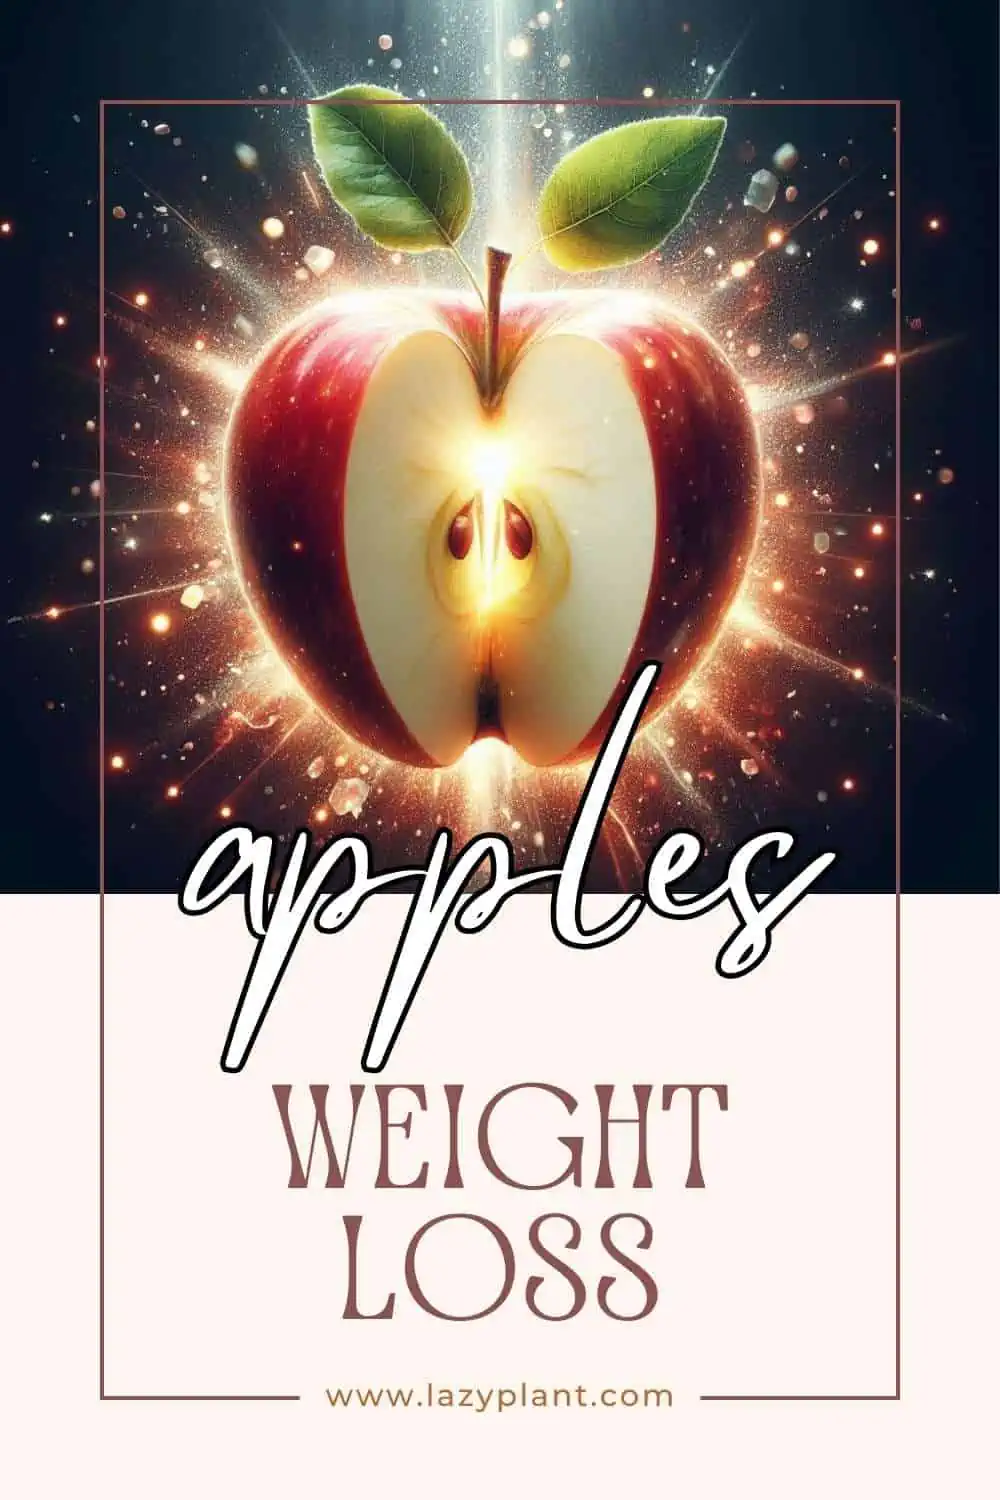 Apples support Weight Loss